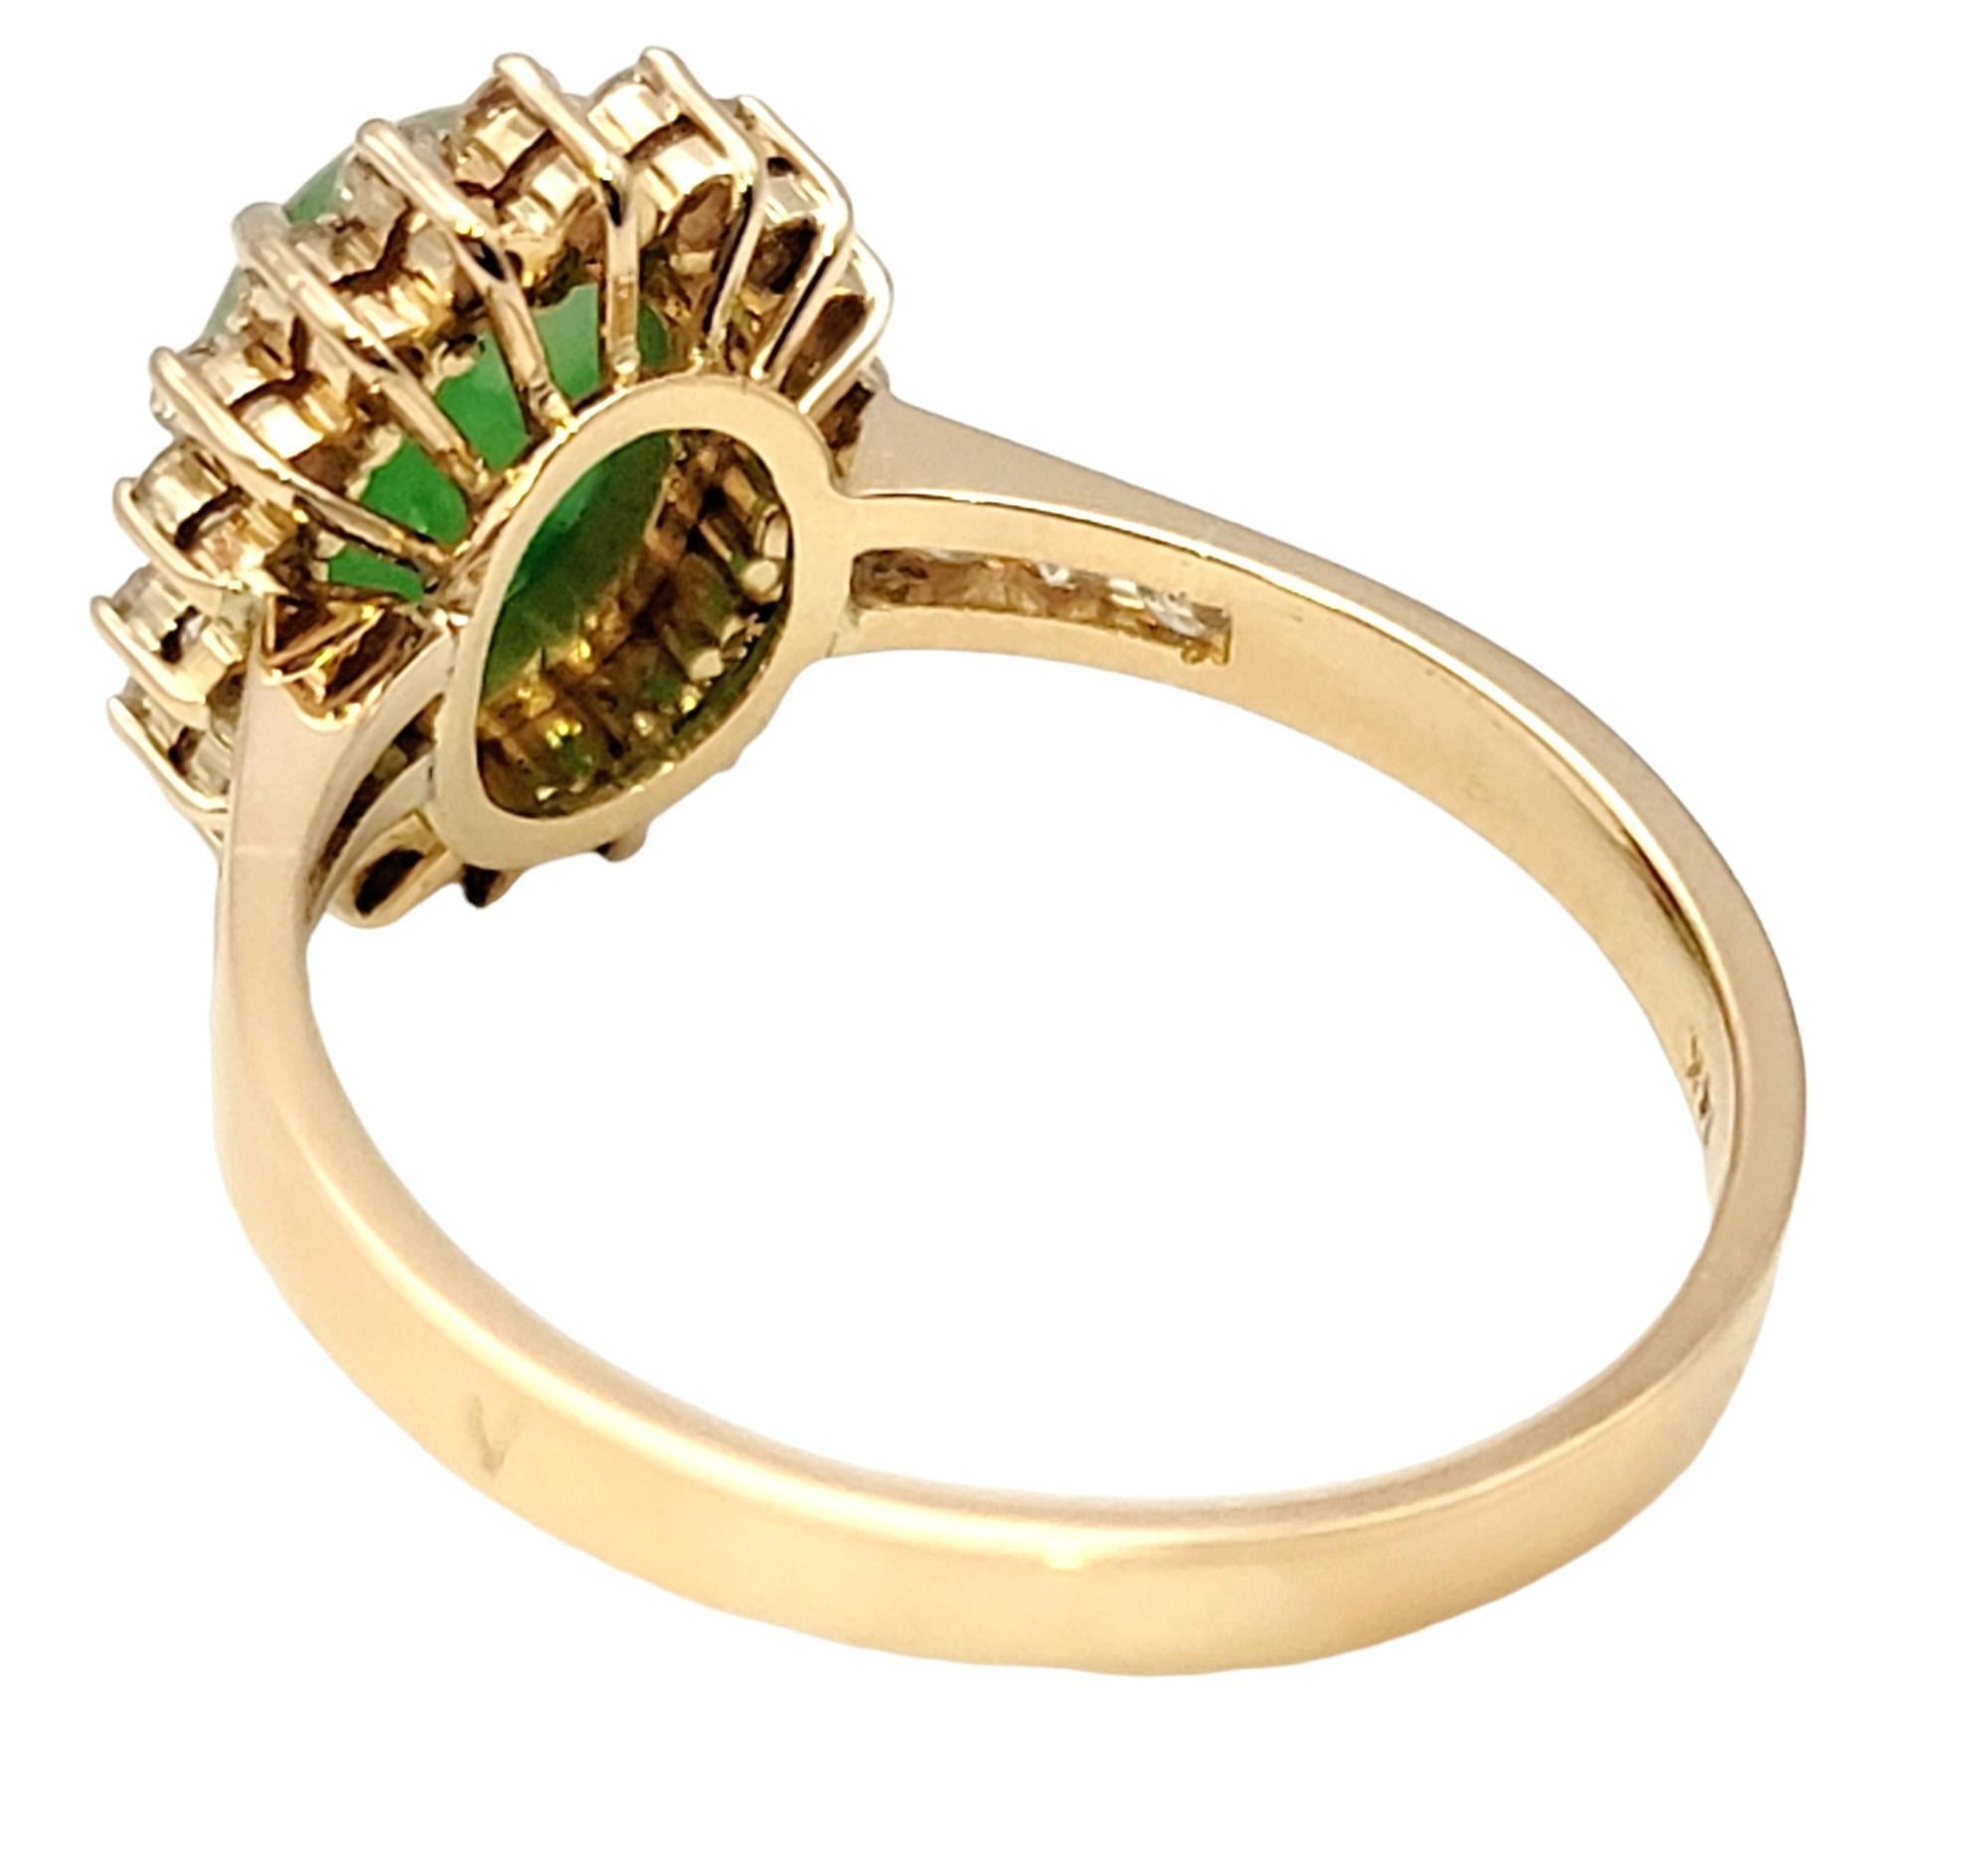 Natural Oval Cabochon Jade and Diamond Halo Ring in 14 Karat Yellow Gold For Sale 1